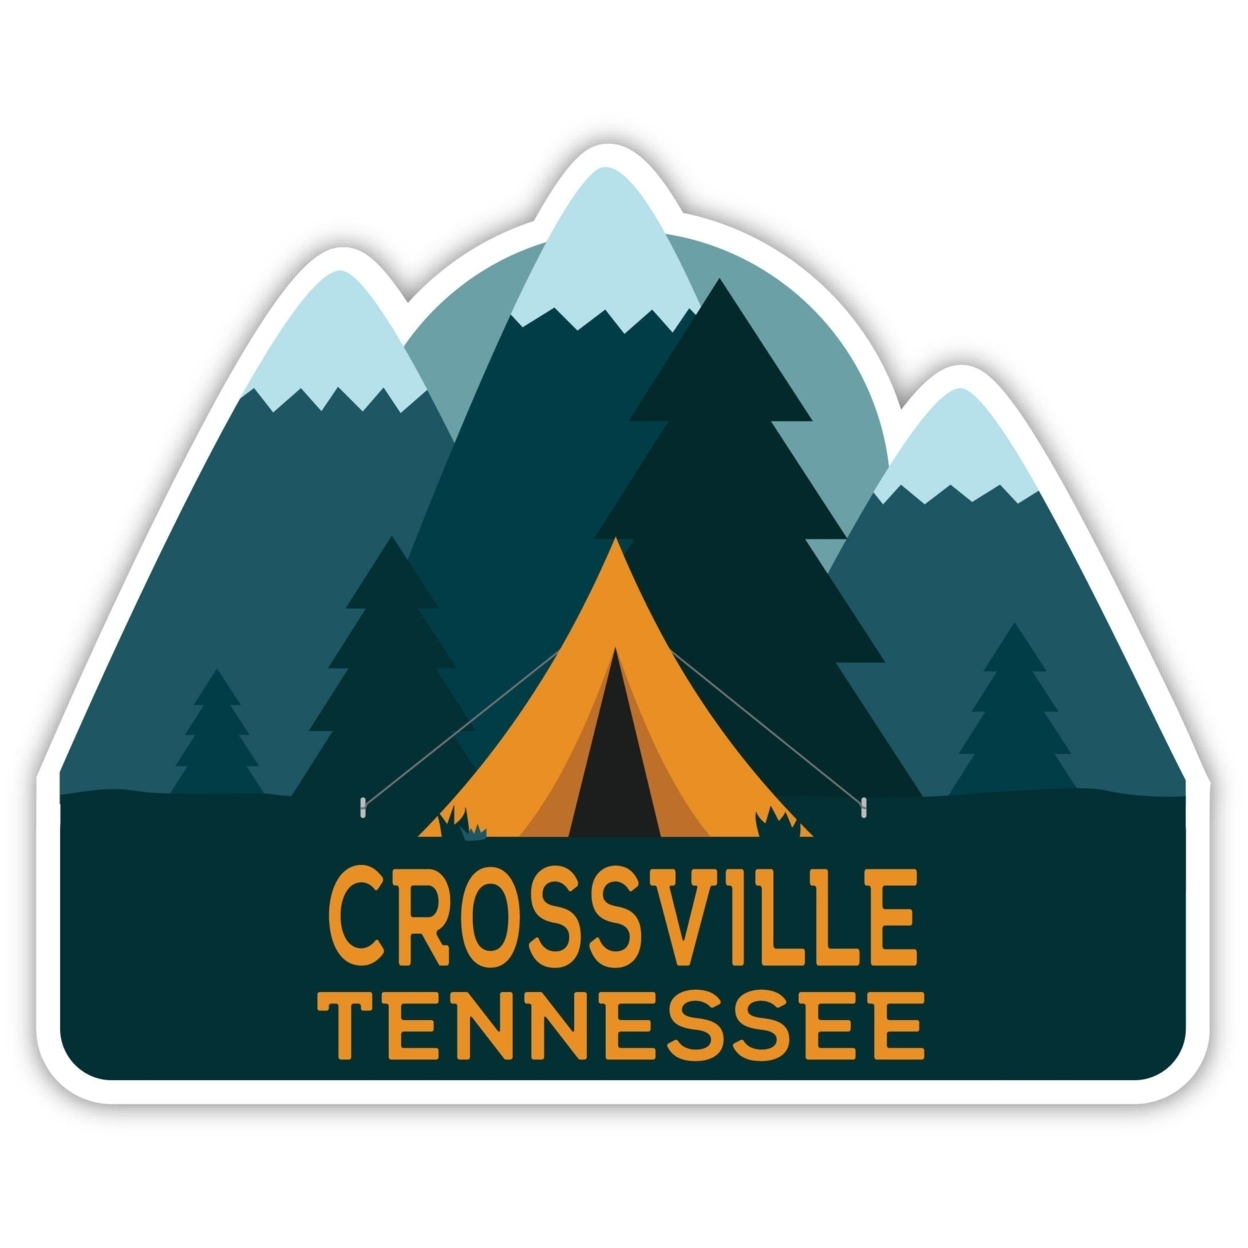 Crossville Tennessee Souvenir Decorative Stickers (Choose Theme And Size) - Single Unit, 2-Inch, Bear